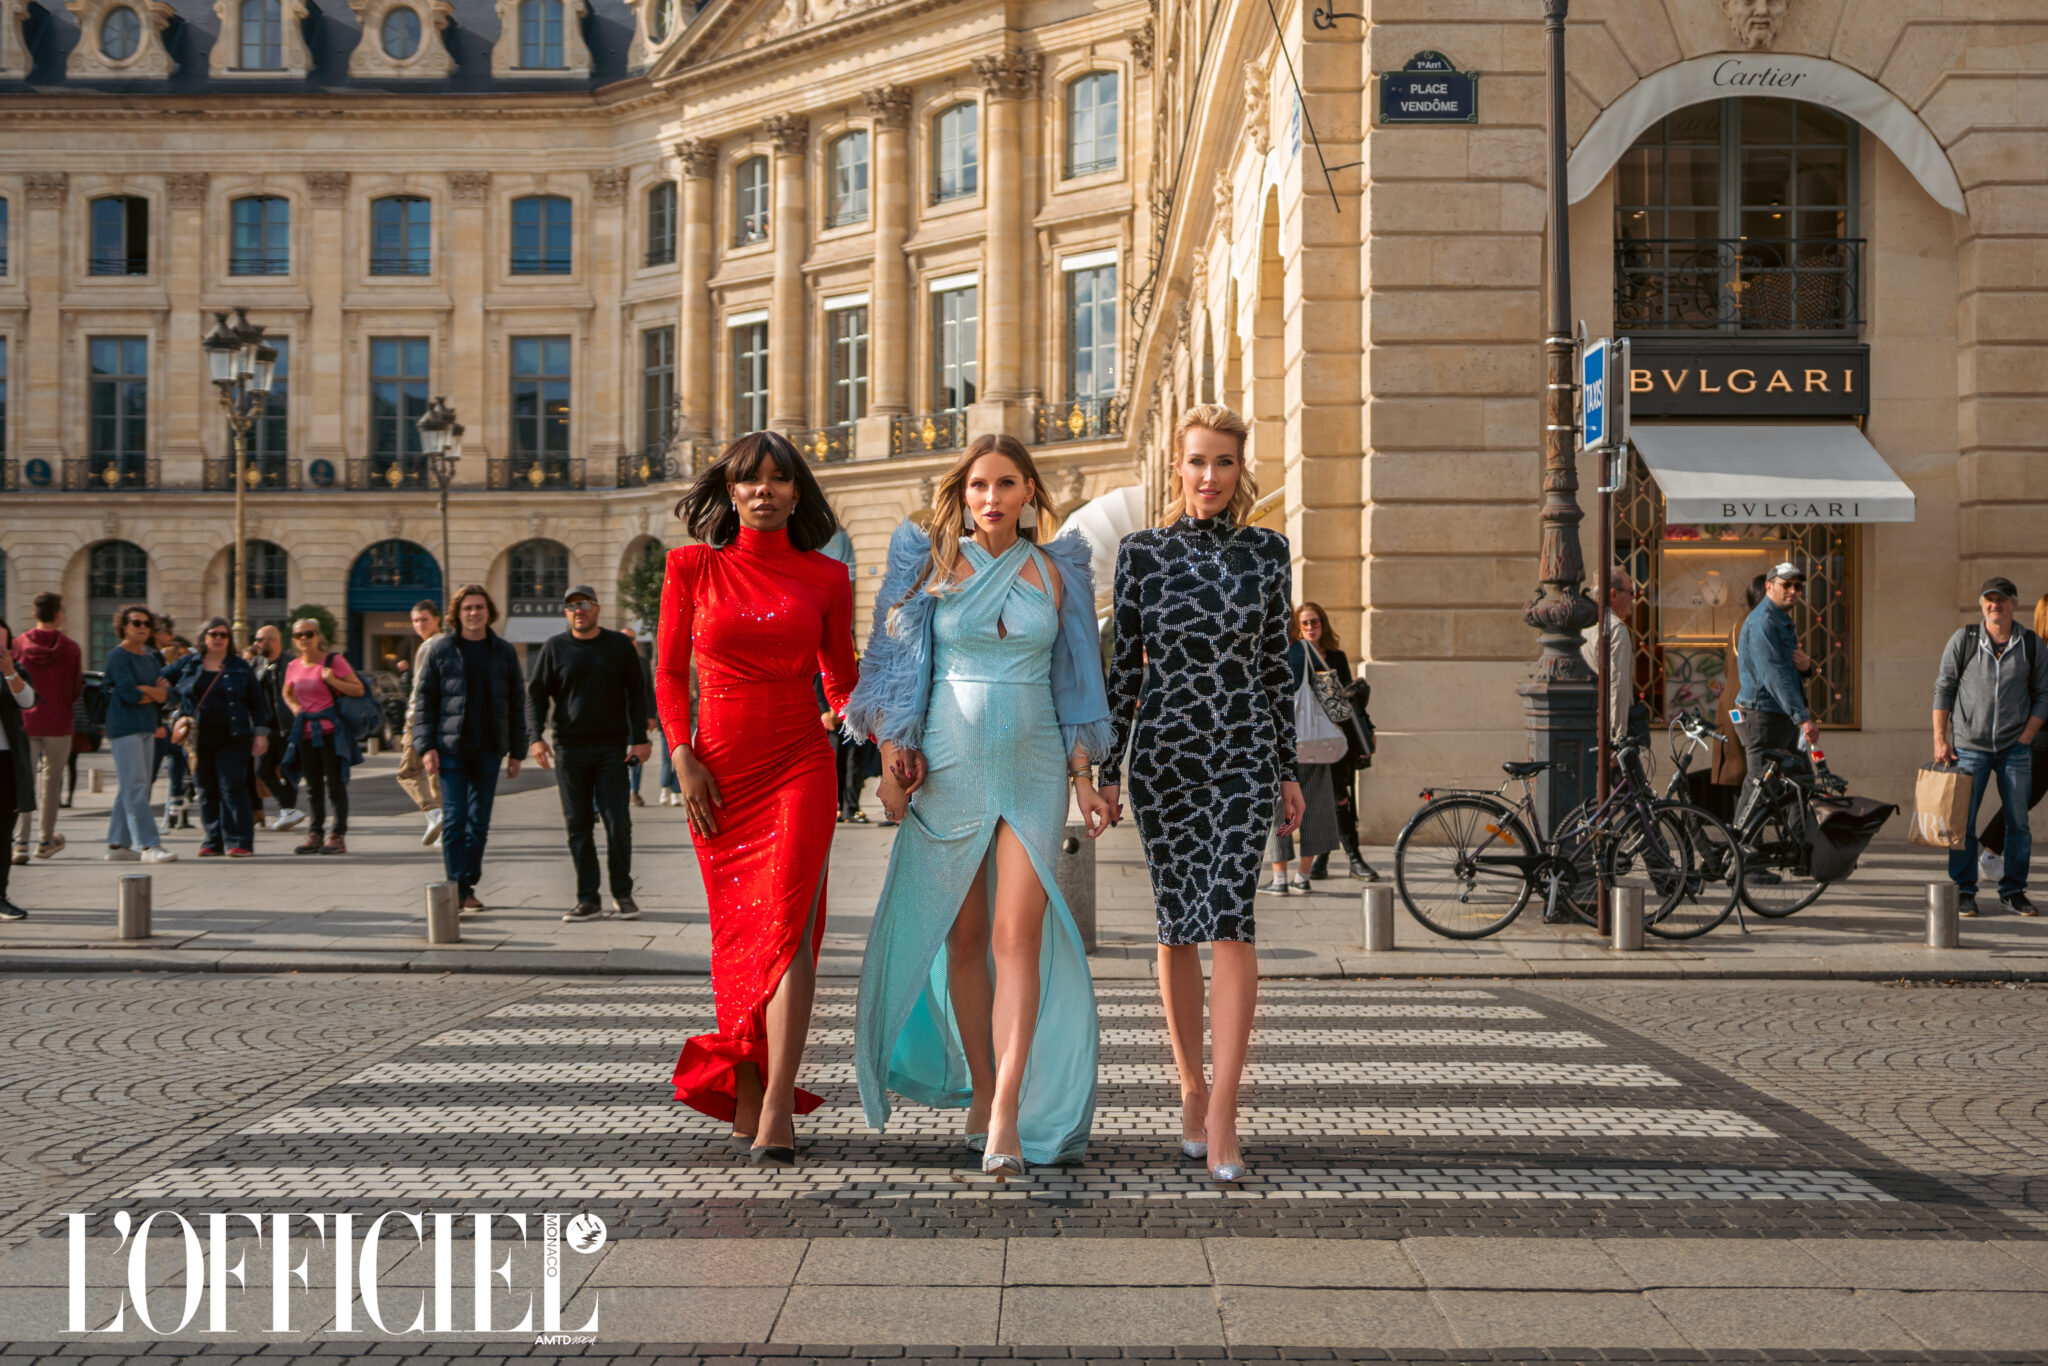 Feature at L'Officiel Monaco during Paris Fashion Week SS 23. Visual Fashion Story from the magical Paris. Featuring: Nicolas Besson, Gemy Maalouf, Charriol, Sol Angelann and more. 61